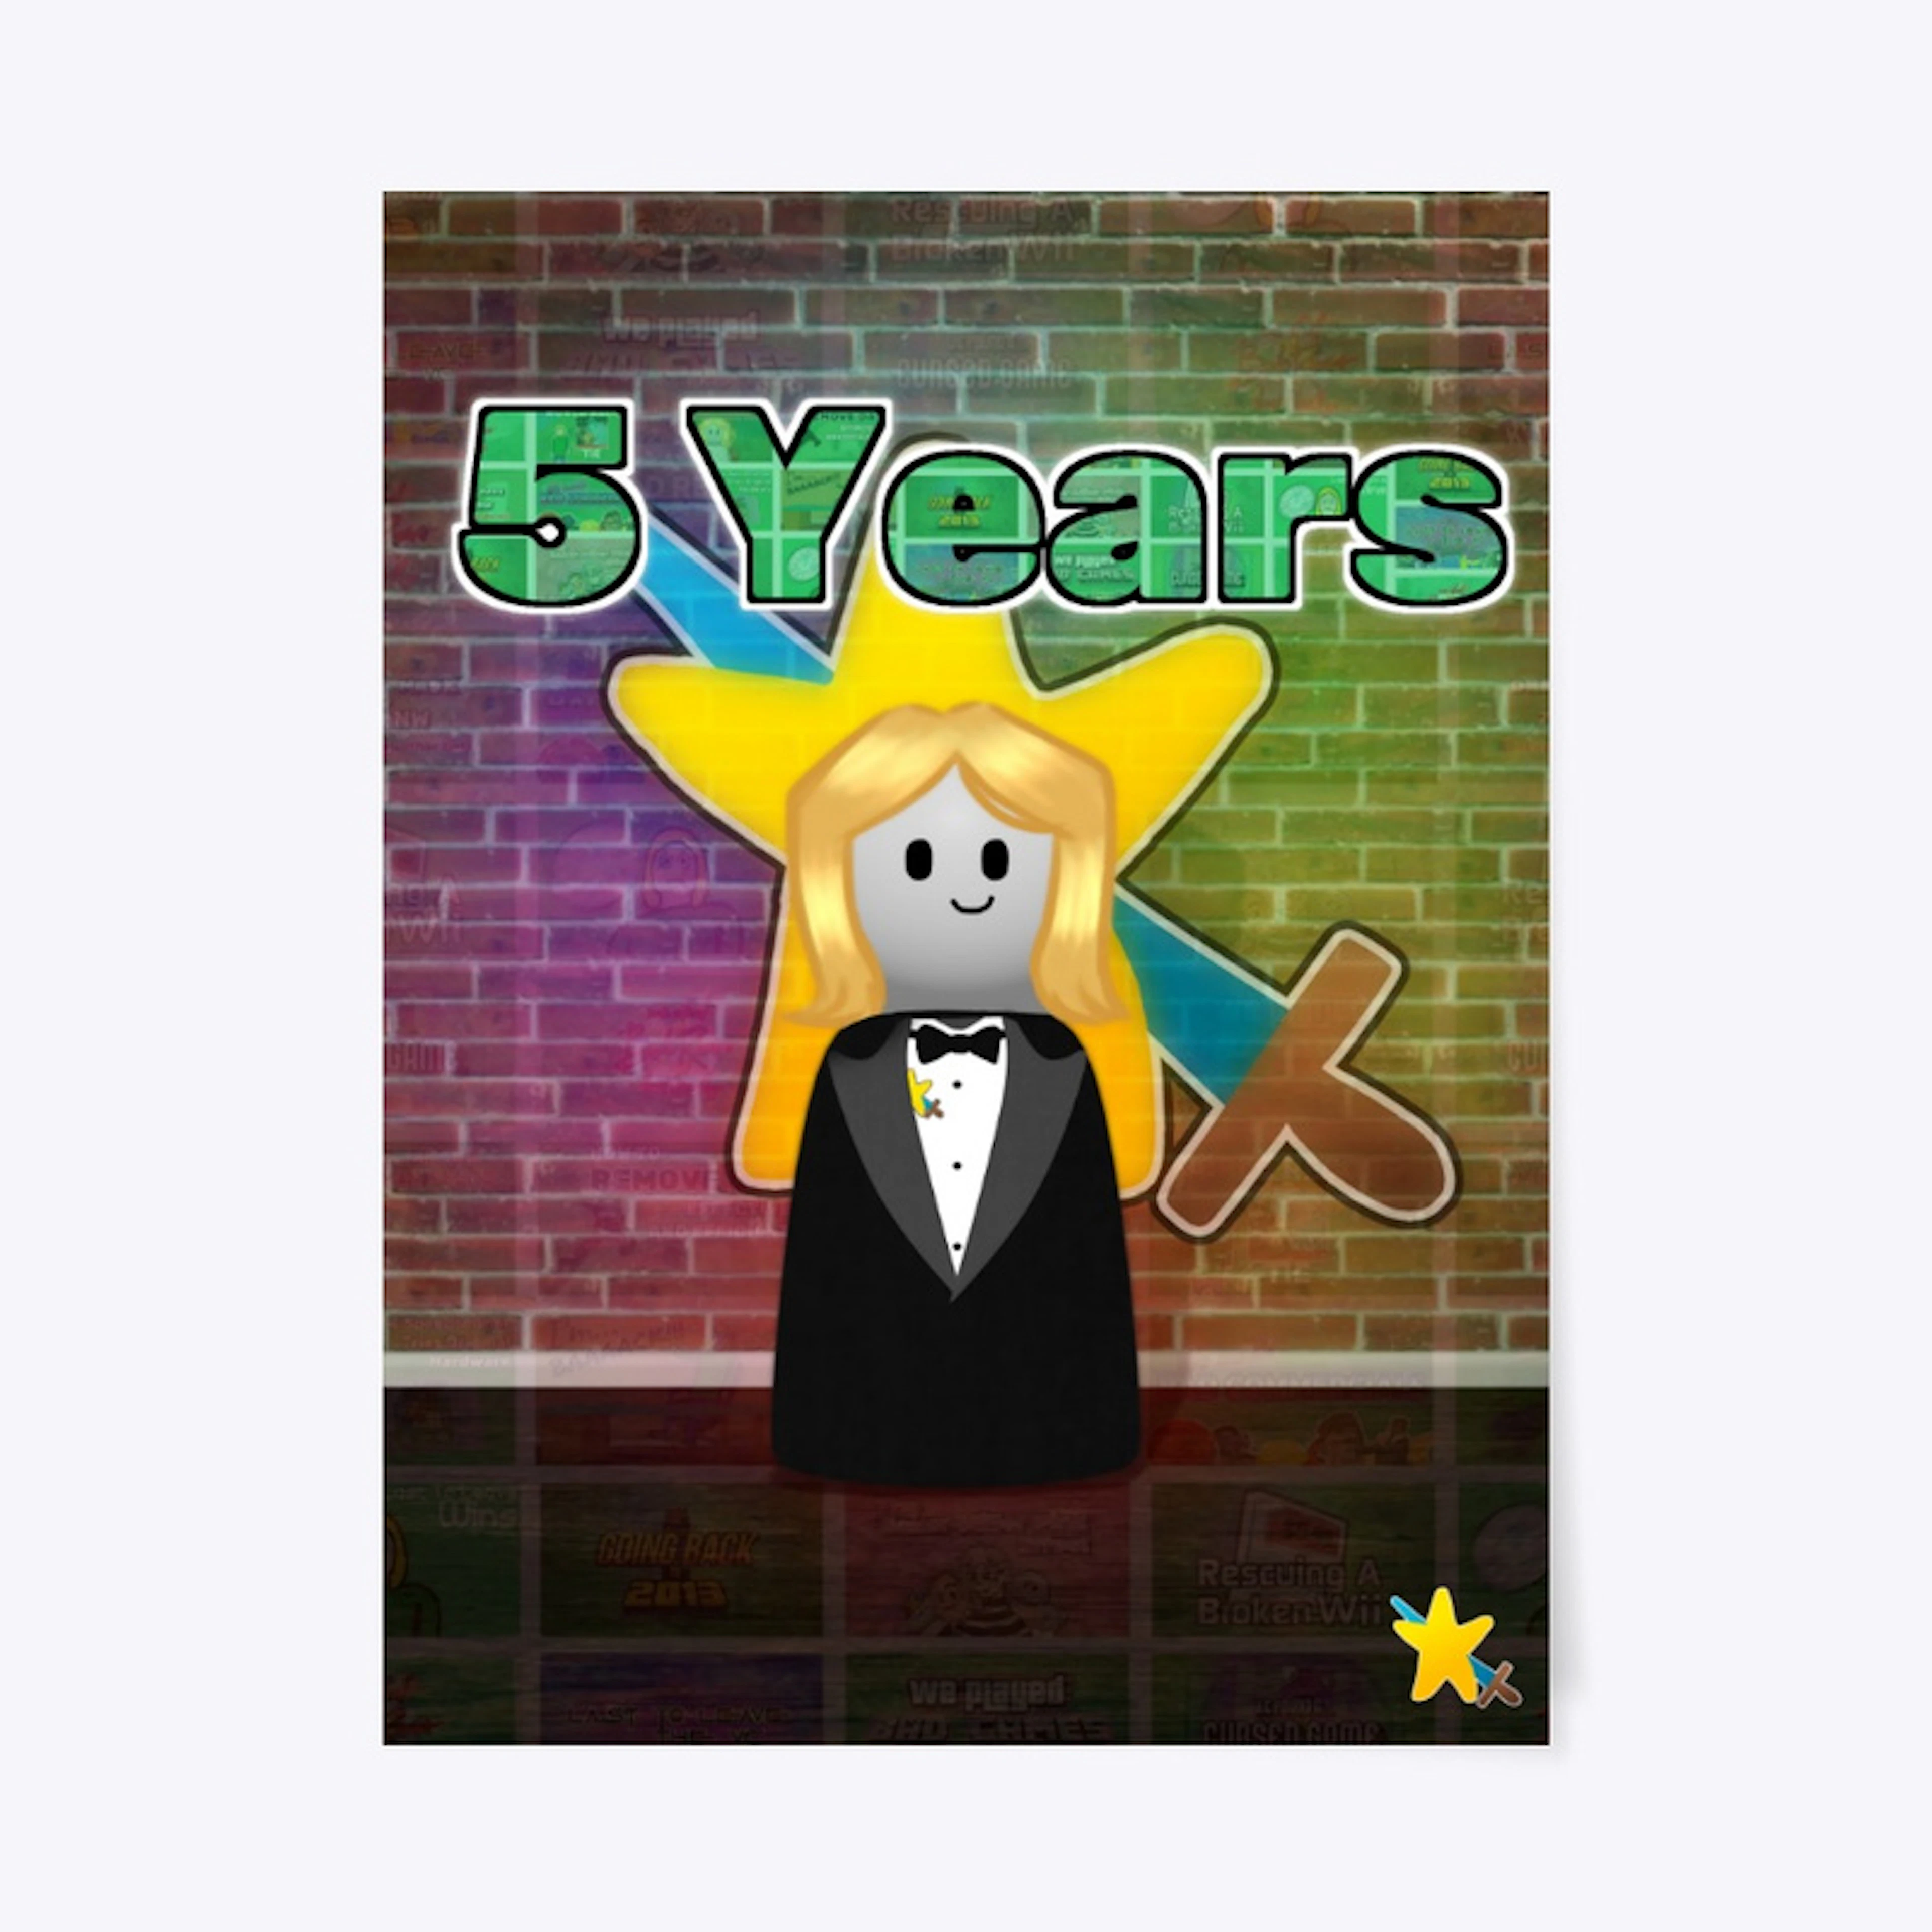 5 Years Poster